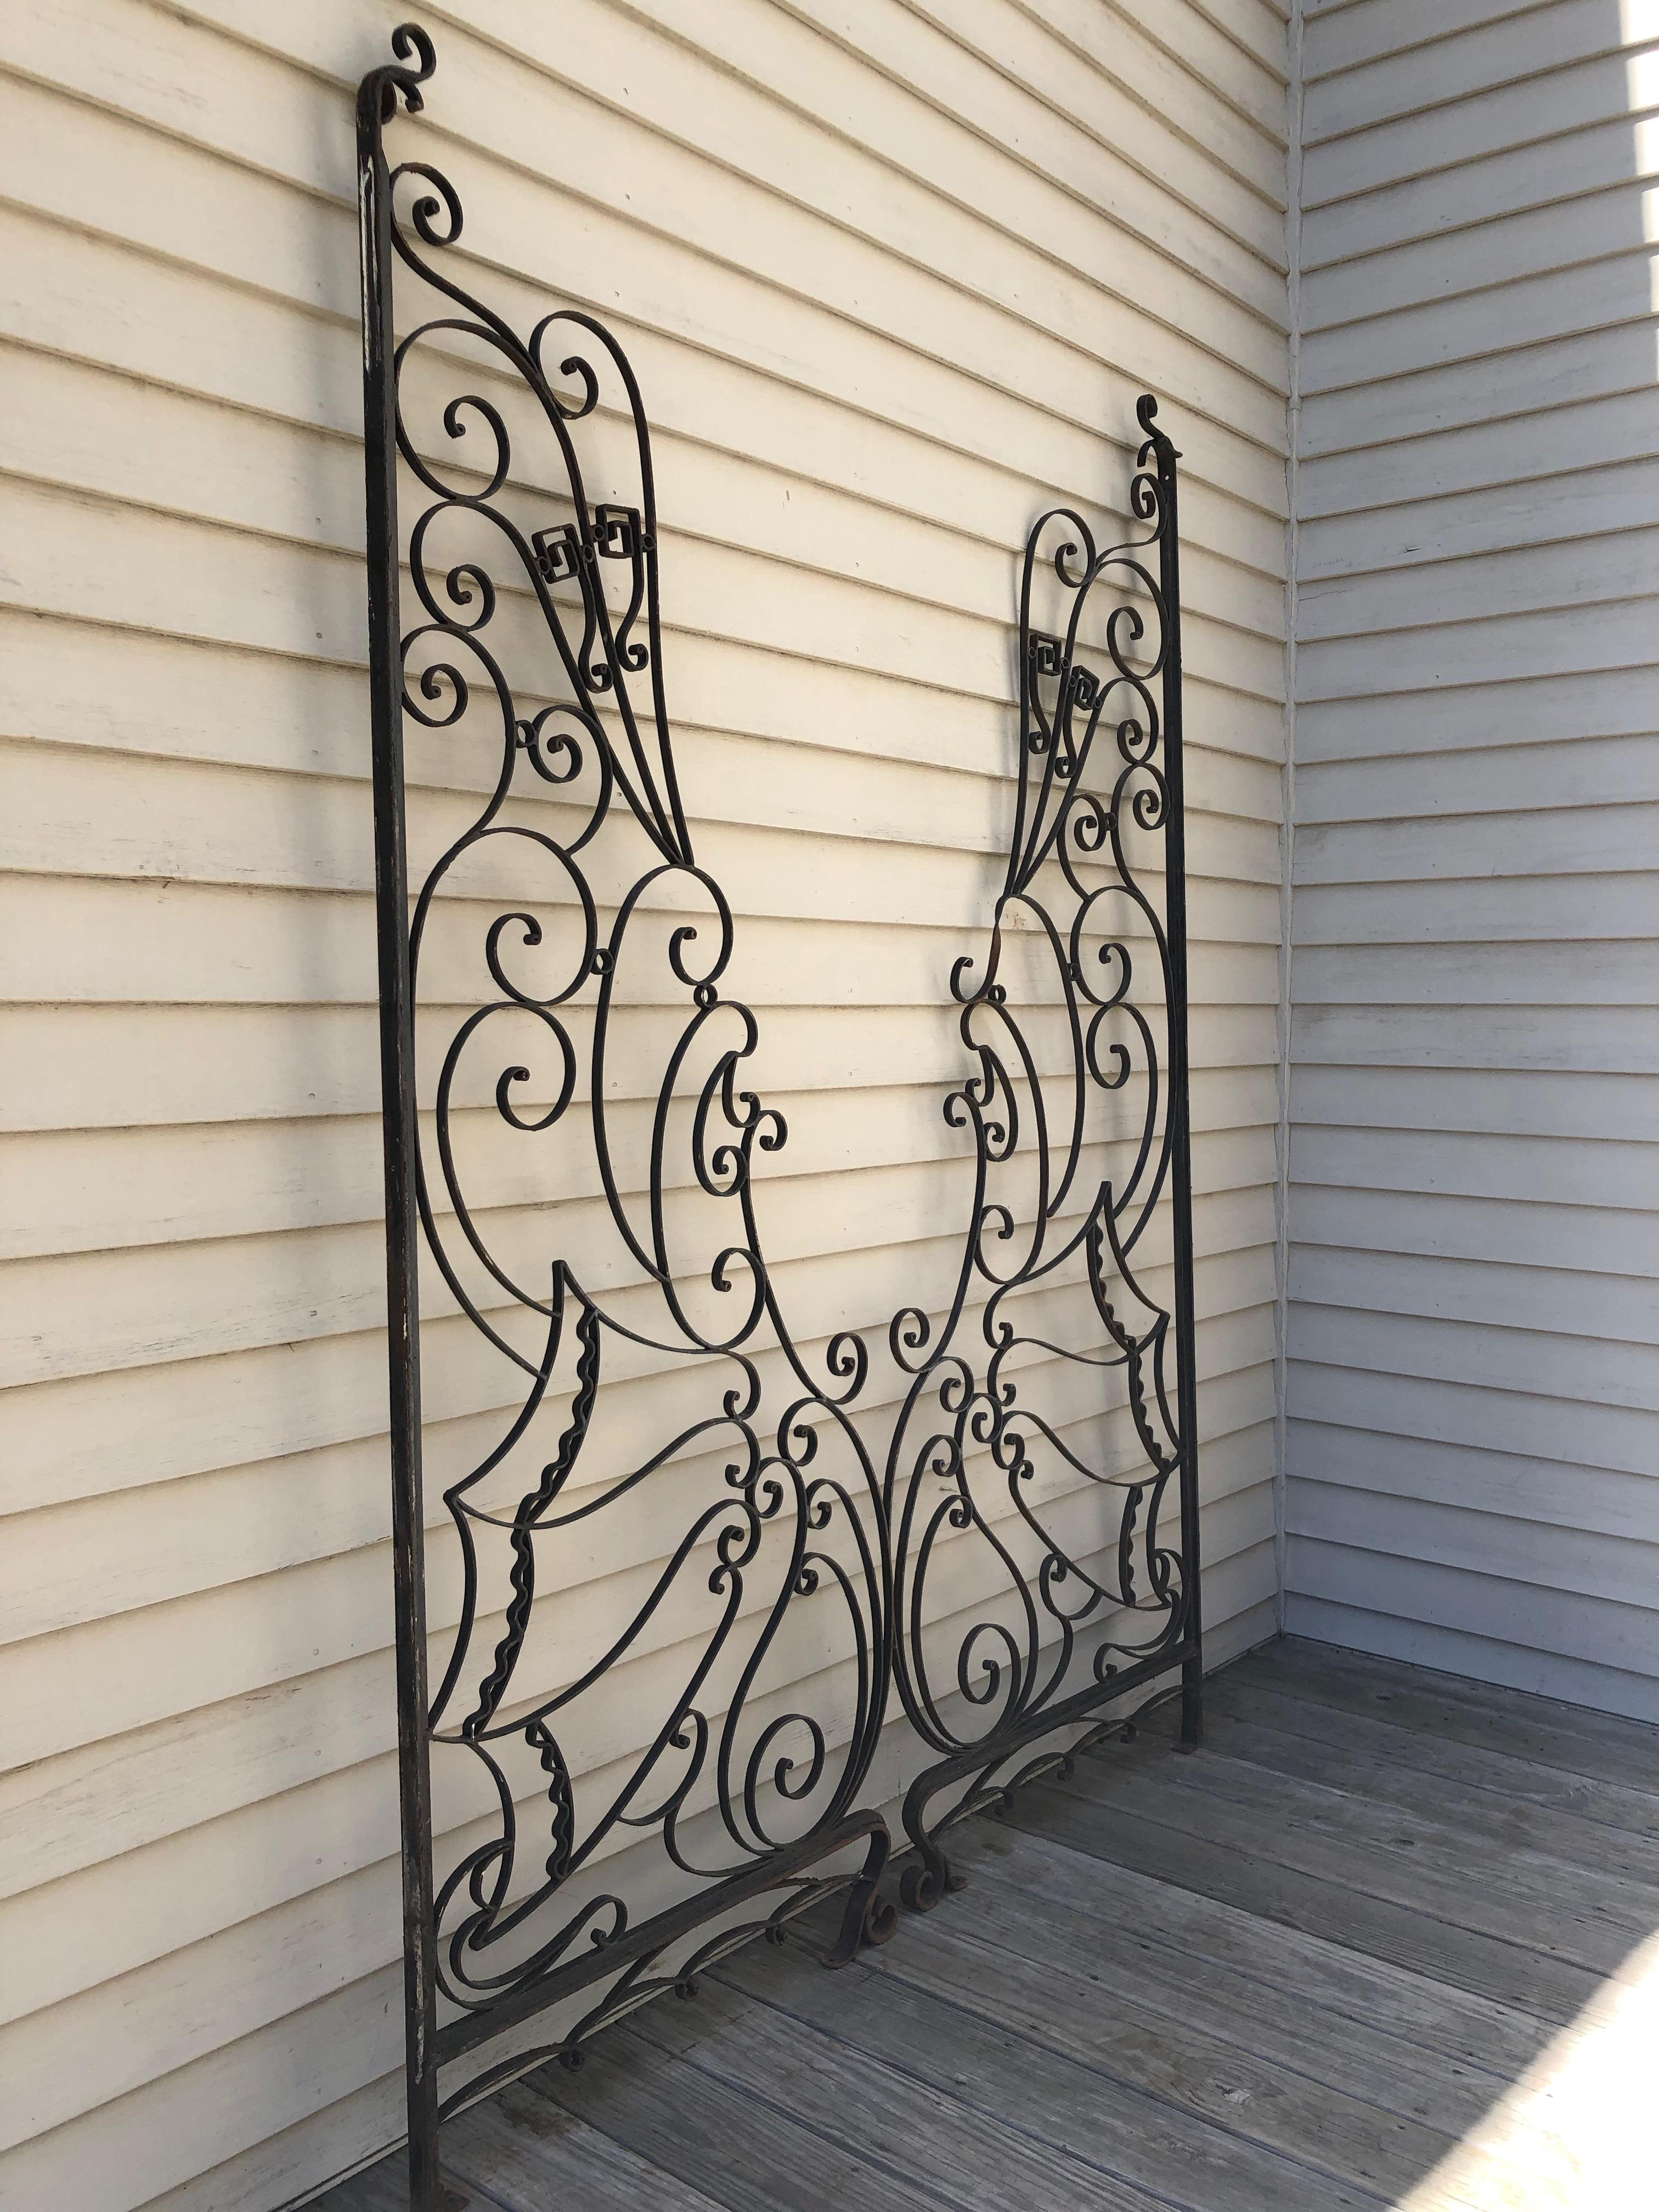 Originally used as balcony dividers and mounted front to back, envision these stunning Deco gates facing each other to provide the perfect frame for your garden or interior room. Handwrought of iron and with a delicate and intricate scrolling form,